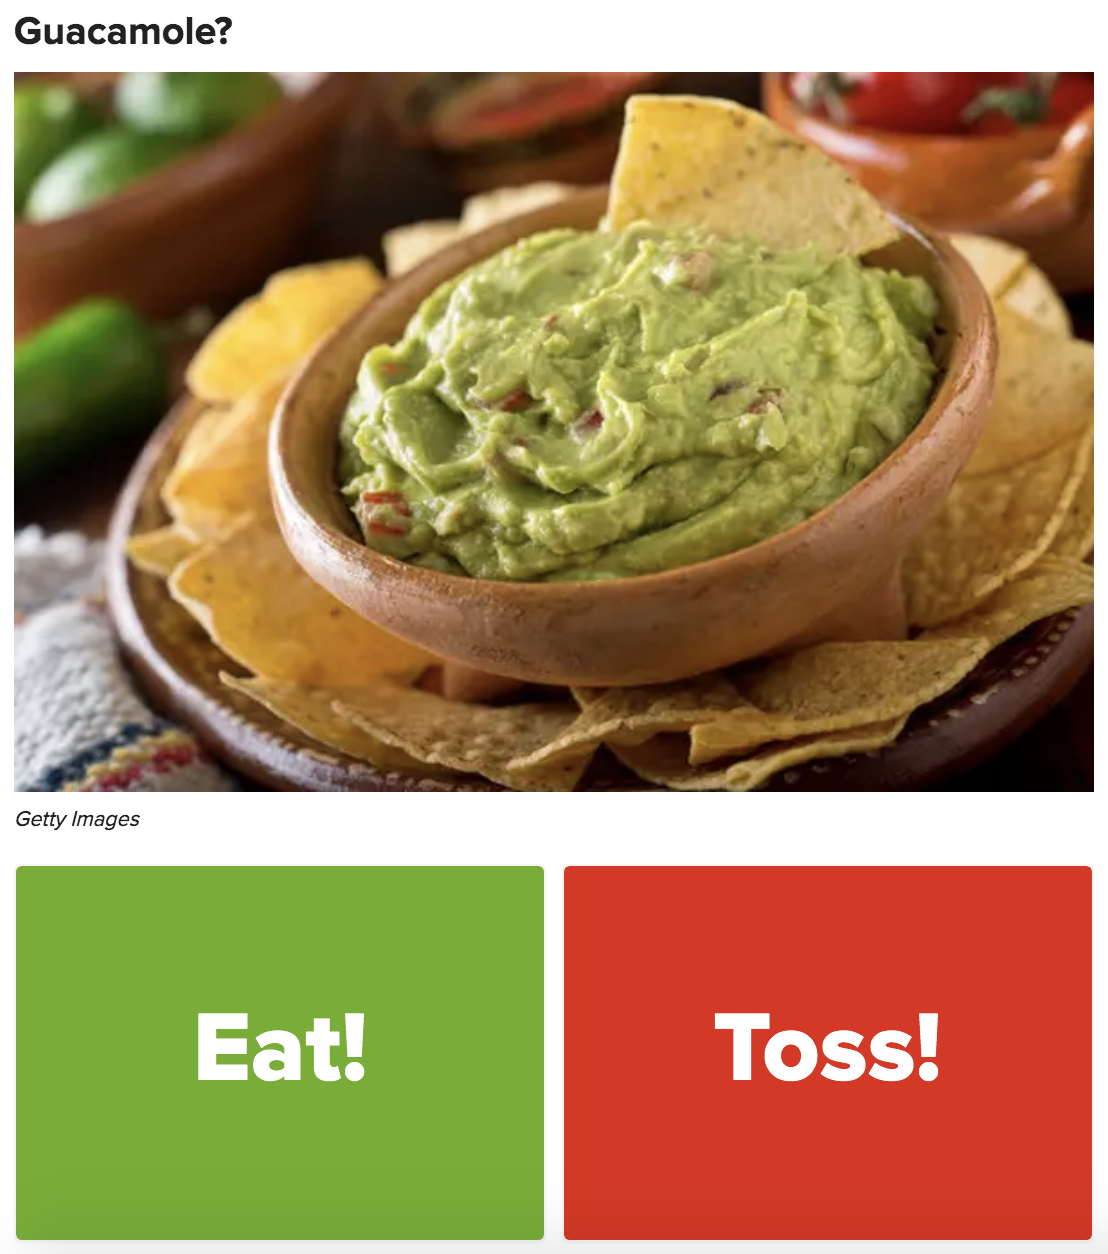 A question asking if you would eat or toss guacamole that had been left out overnight